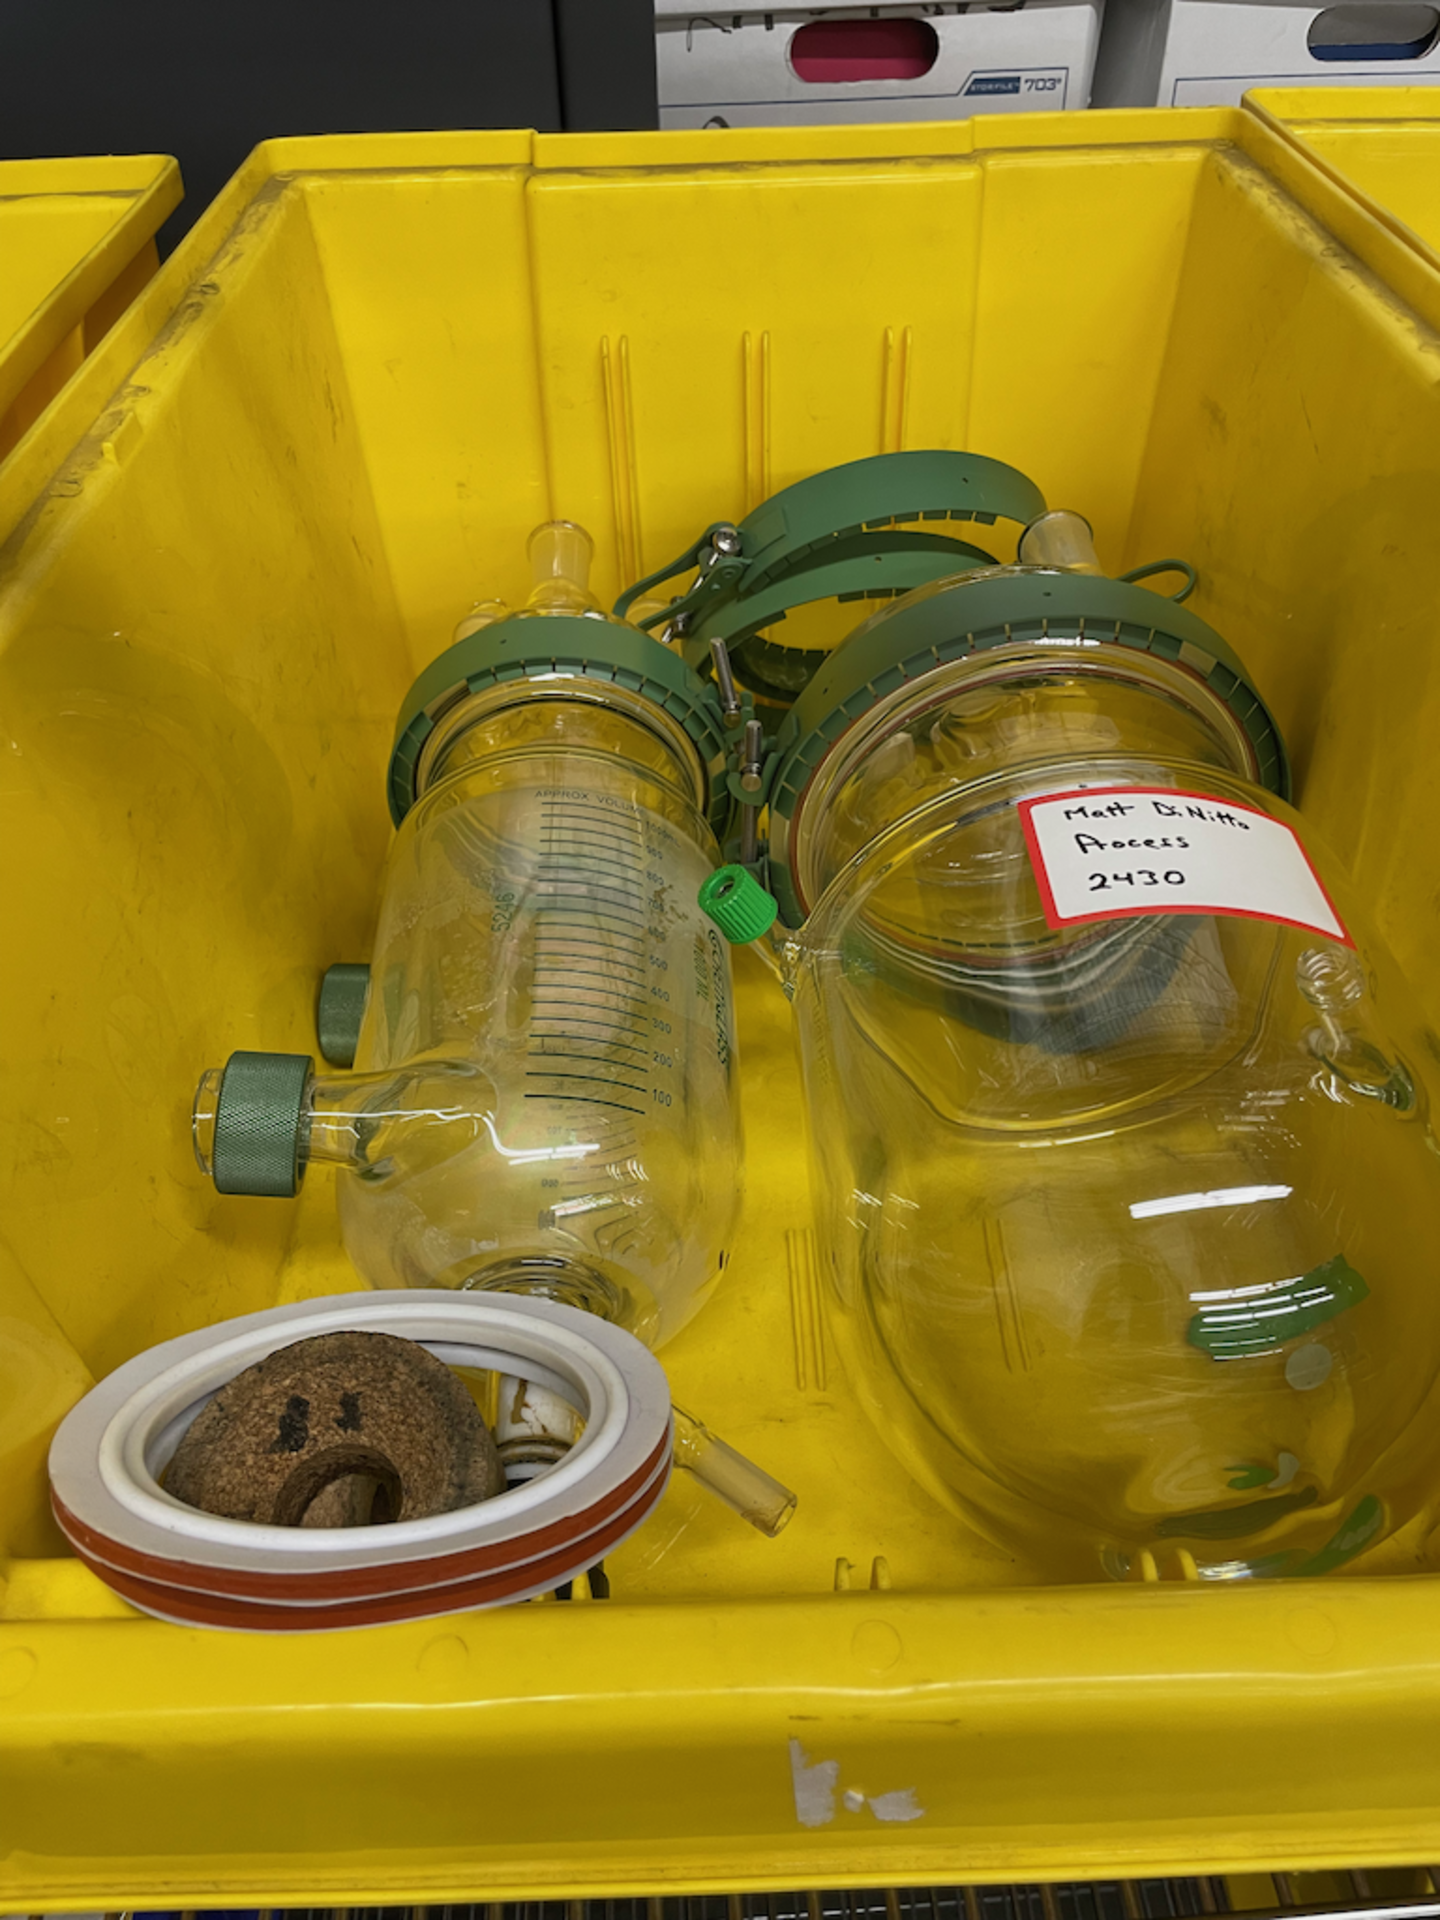 CHEMGLASS LOT CONSISTING OF THE CONTENTS OF QTY-4 YELLOW TOTE BINS CONTAINING VARIOUS CHEMGLASS - Image 4 of 9